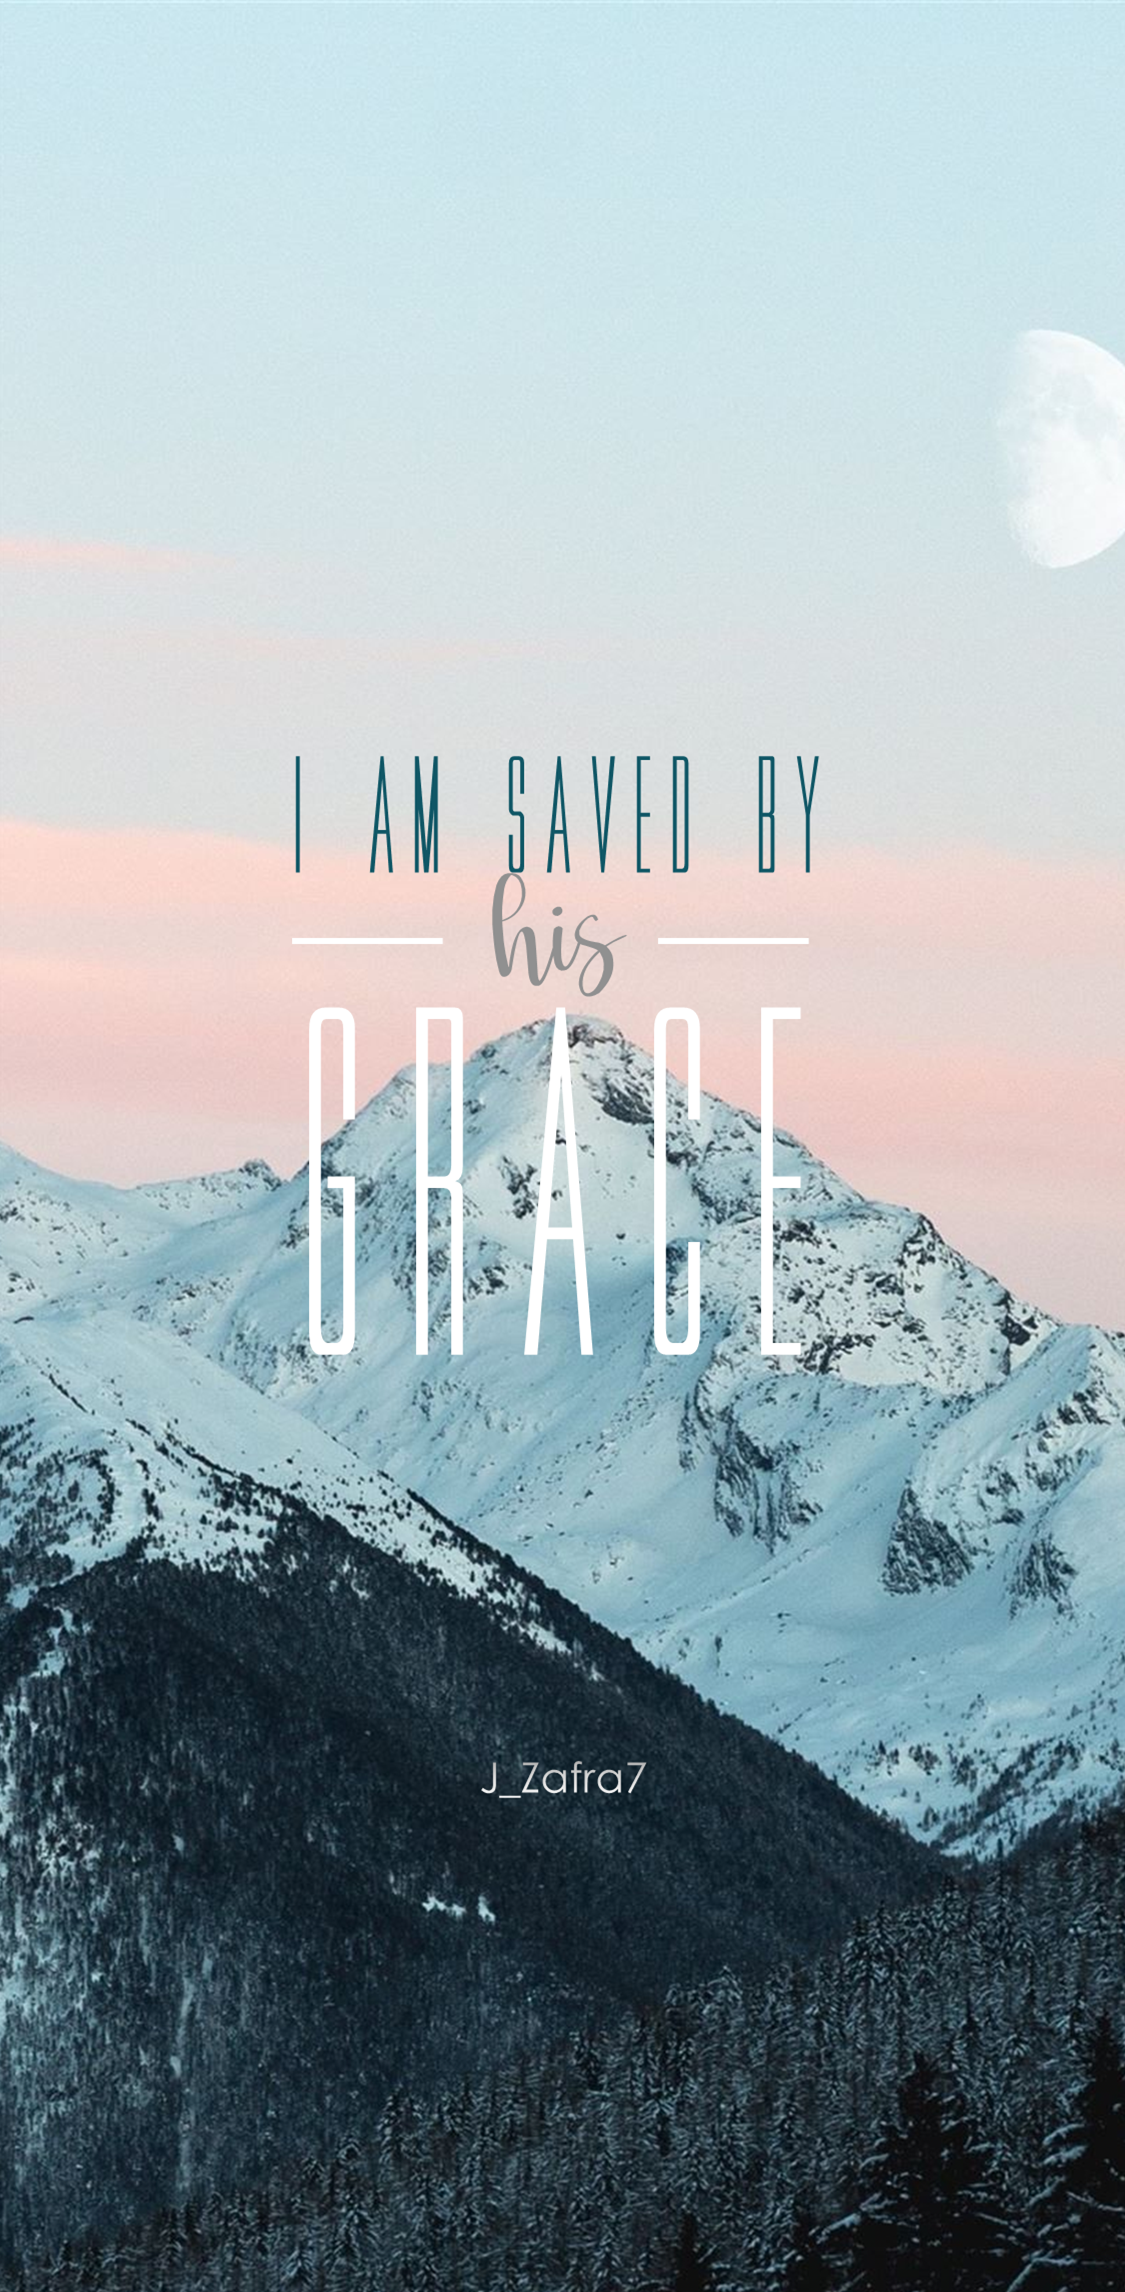 Imágenes Cristianas, Christian Wallpaper Free Christian Background- I am saved for His Grace